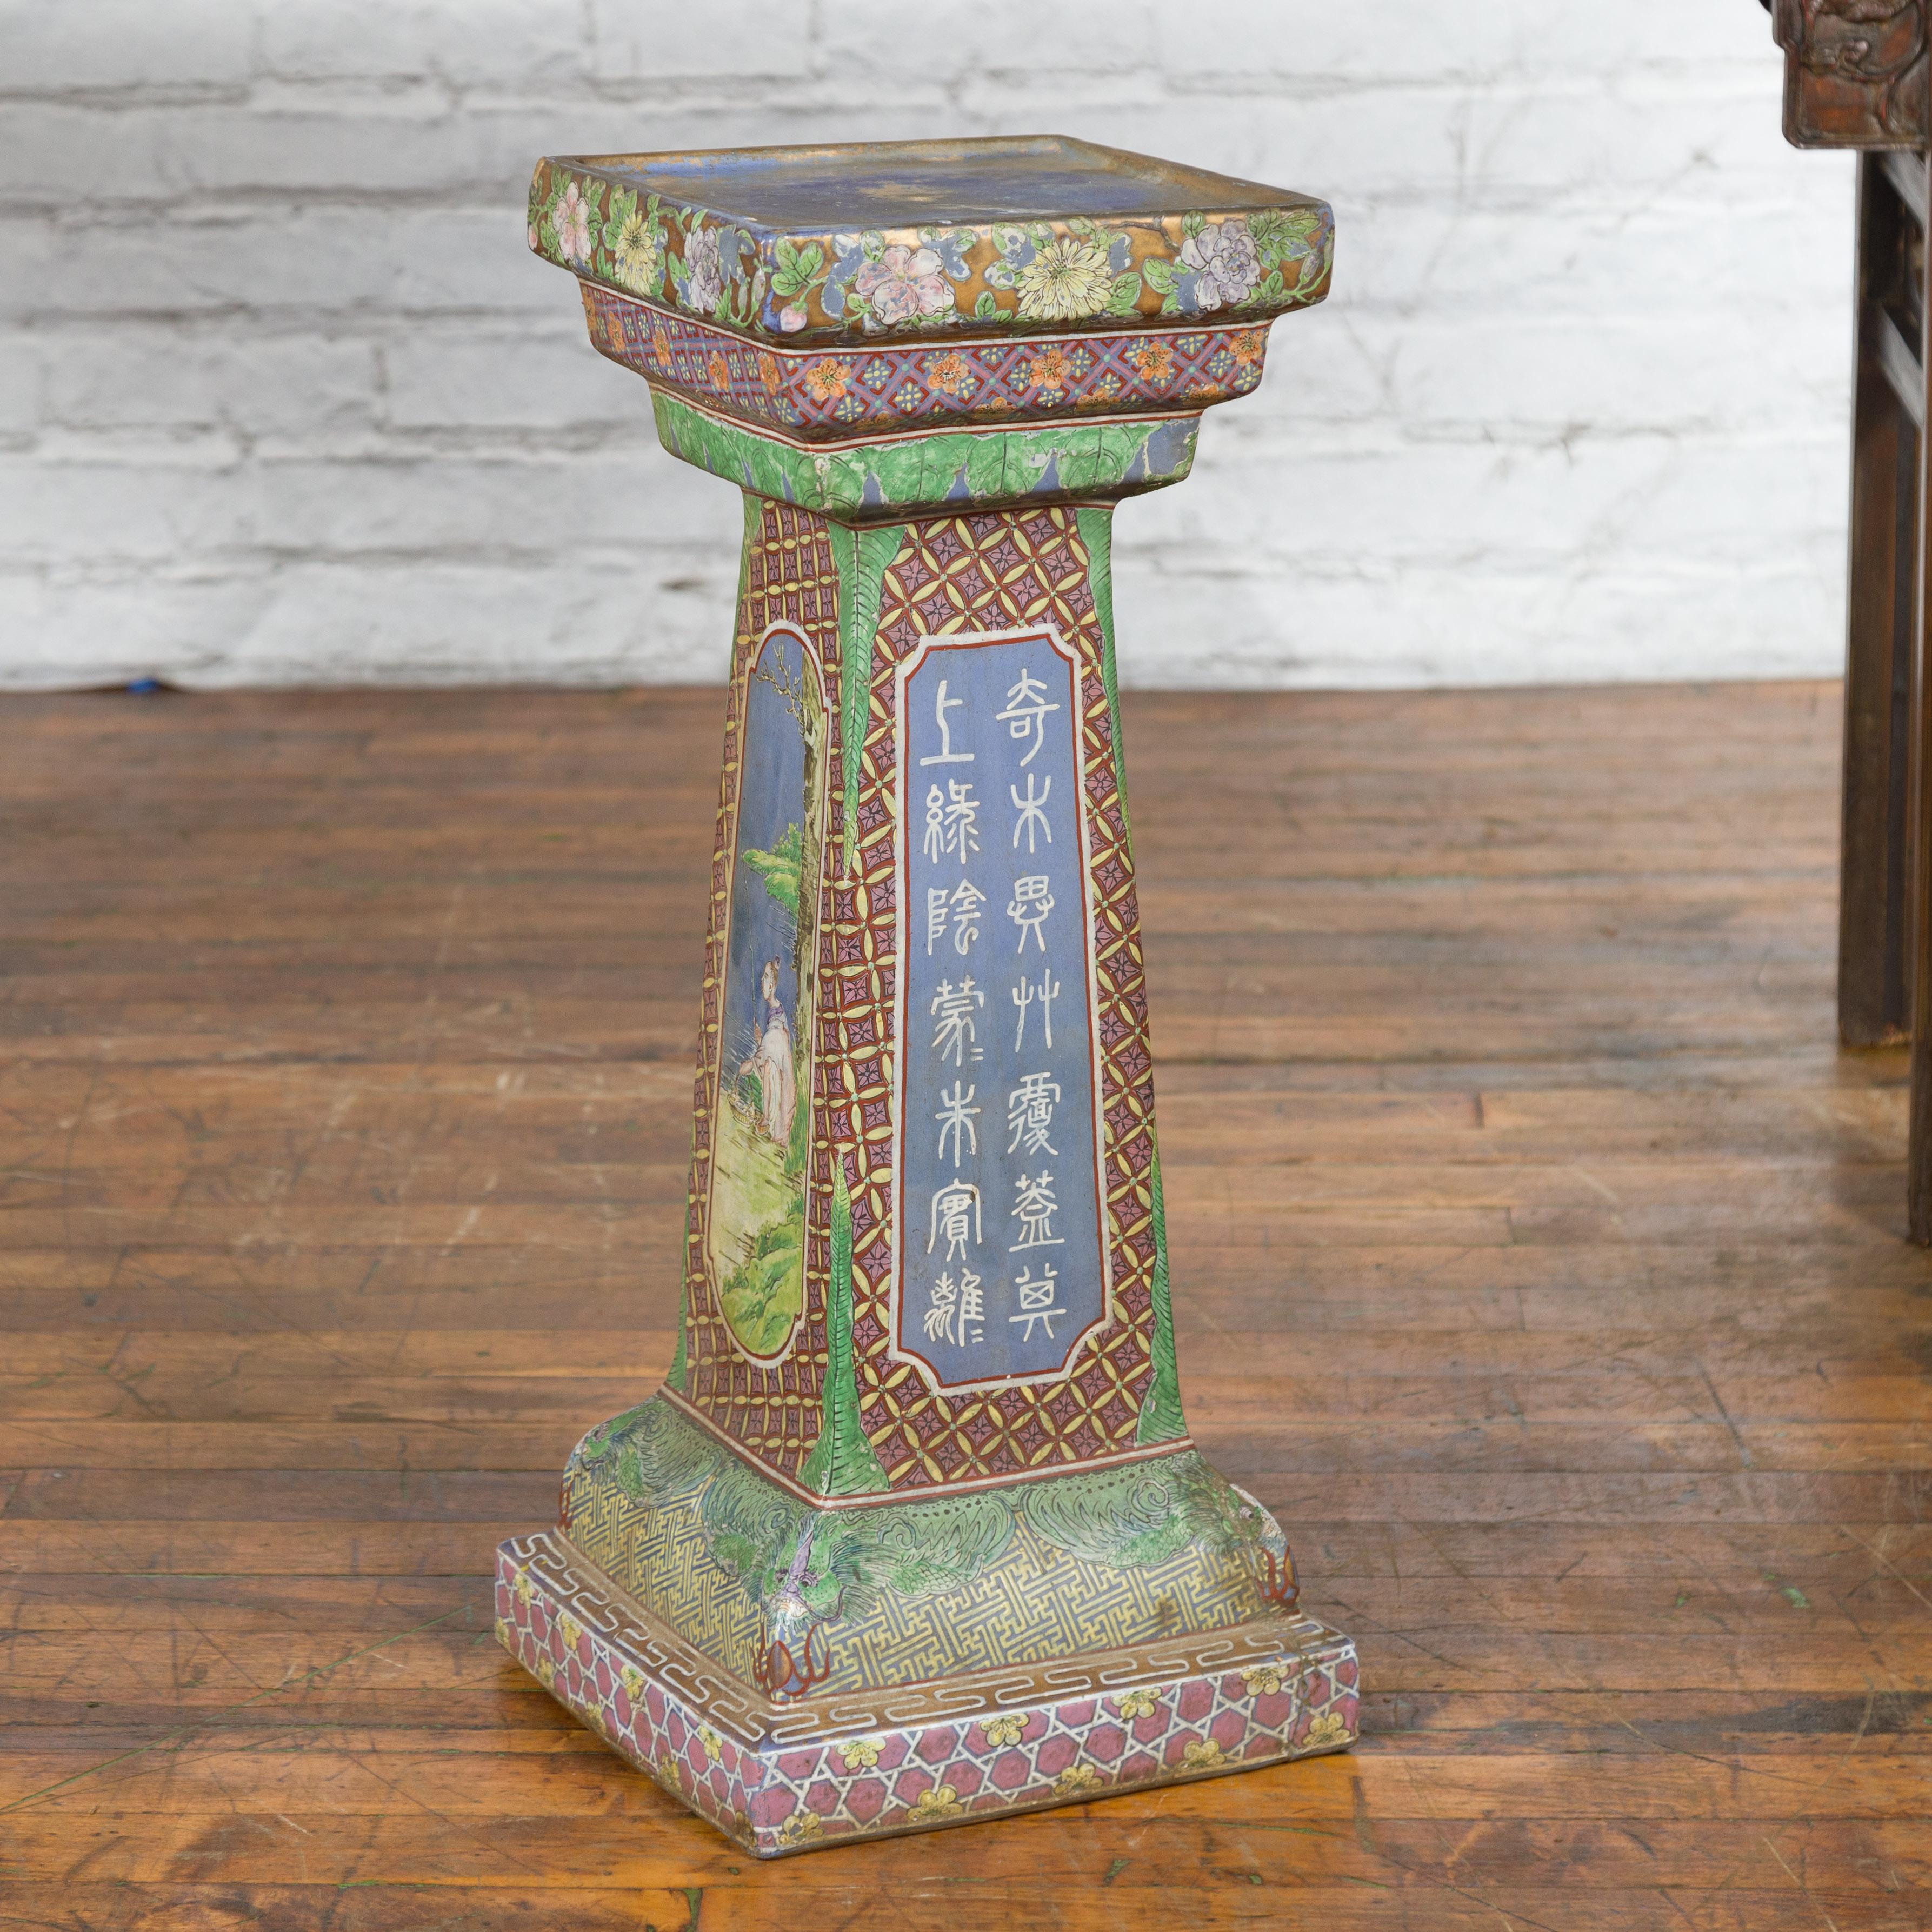 Chinese Vintage Ceramic Pedestal Stand with Hand-Painted Calligraphy and Figures For Sale 5